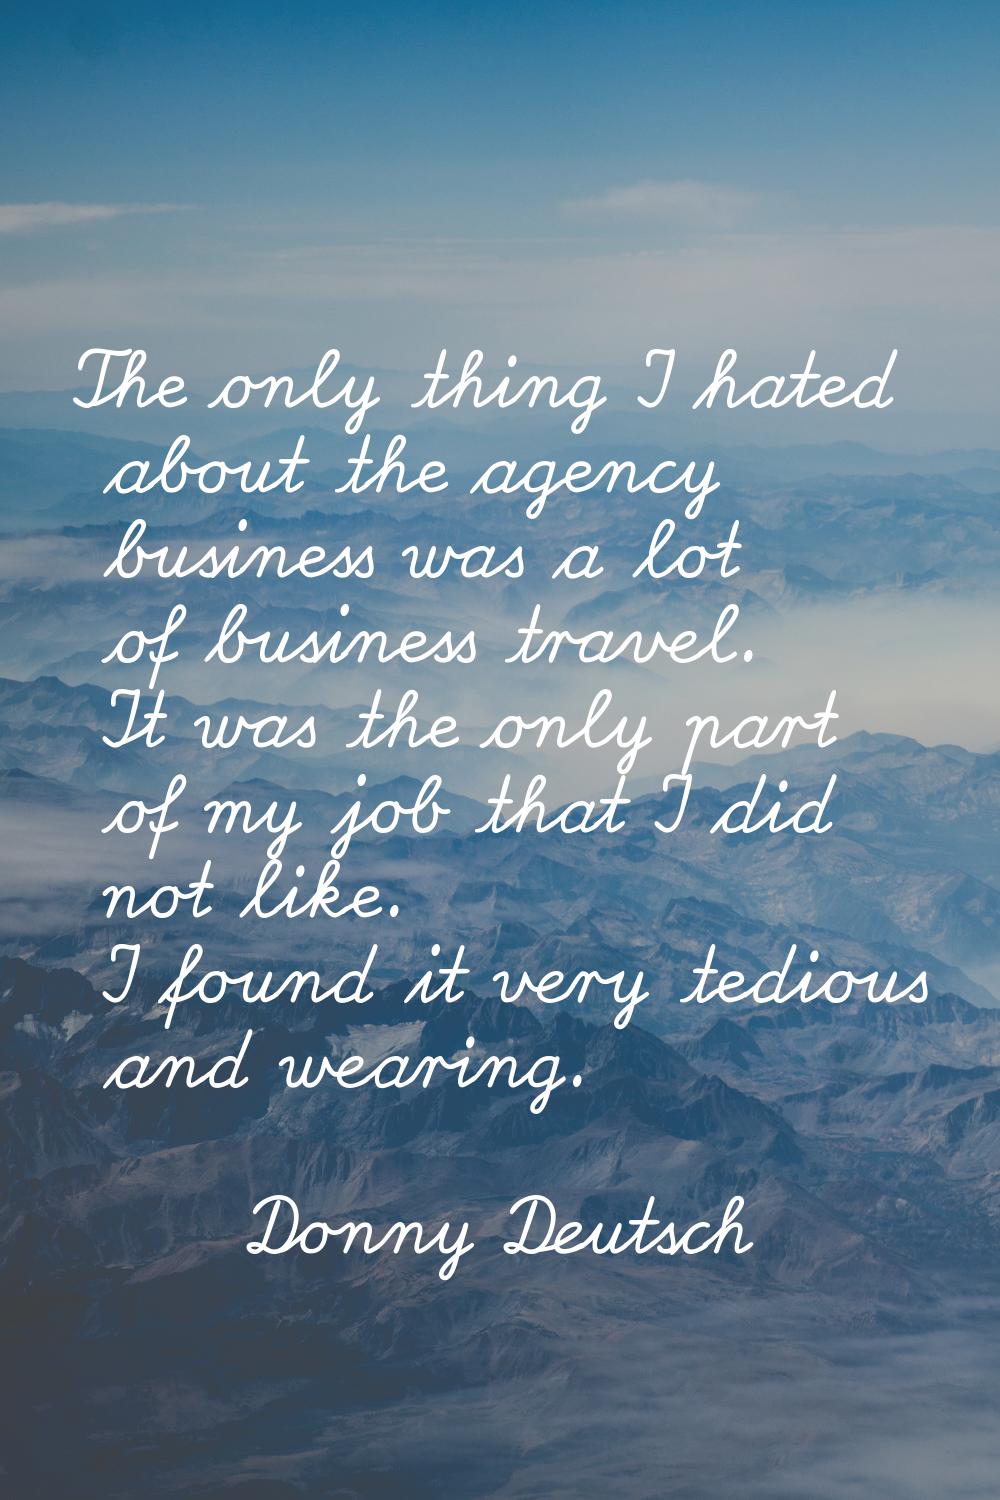 The only thing I hated about the agency business was a lot of business travel. It was the only part